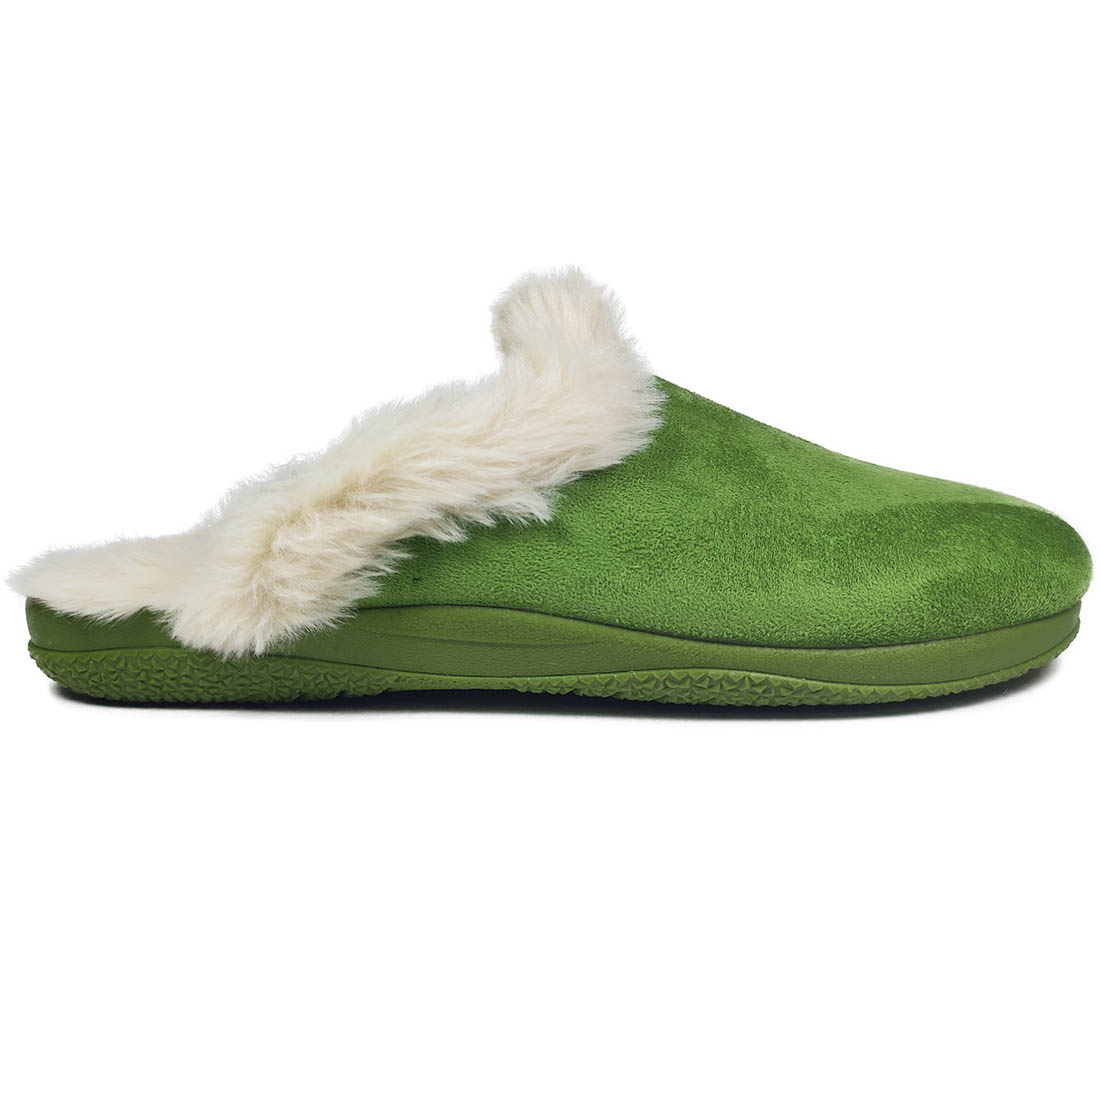 Fur Anatomical Slippers Dicas X29657 Light green